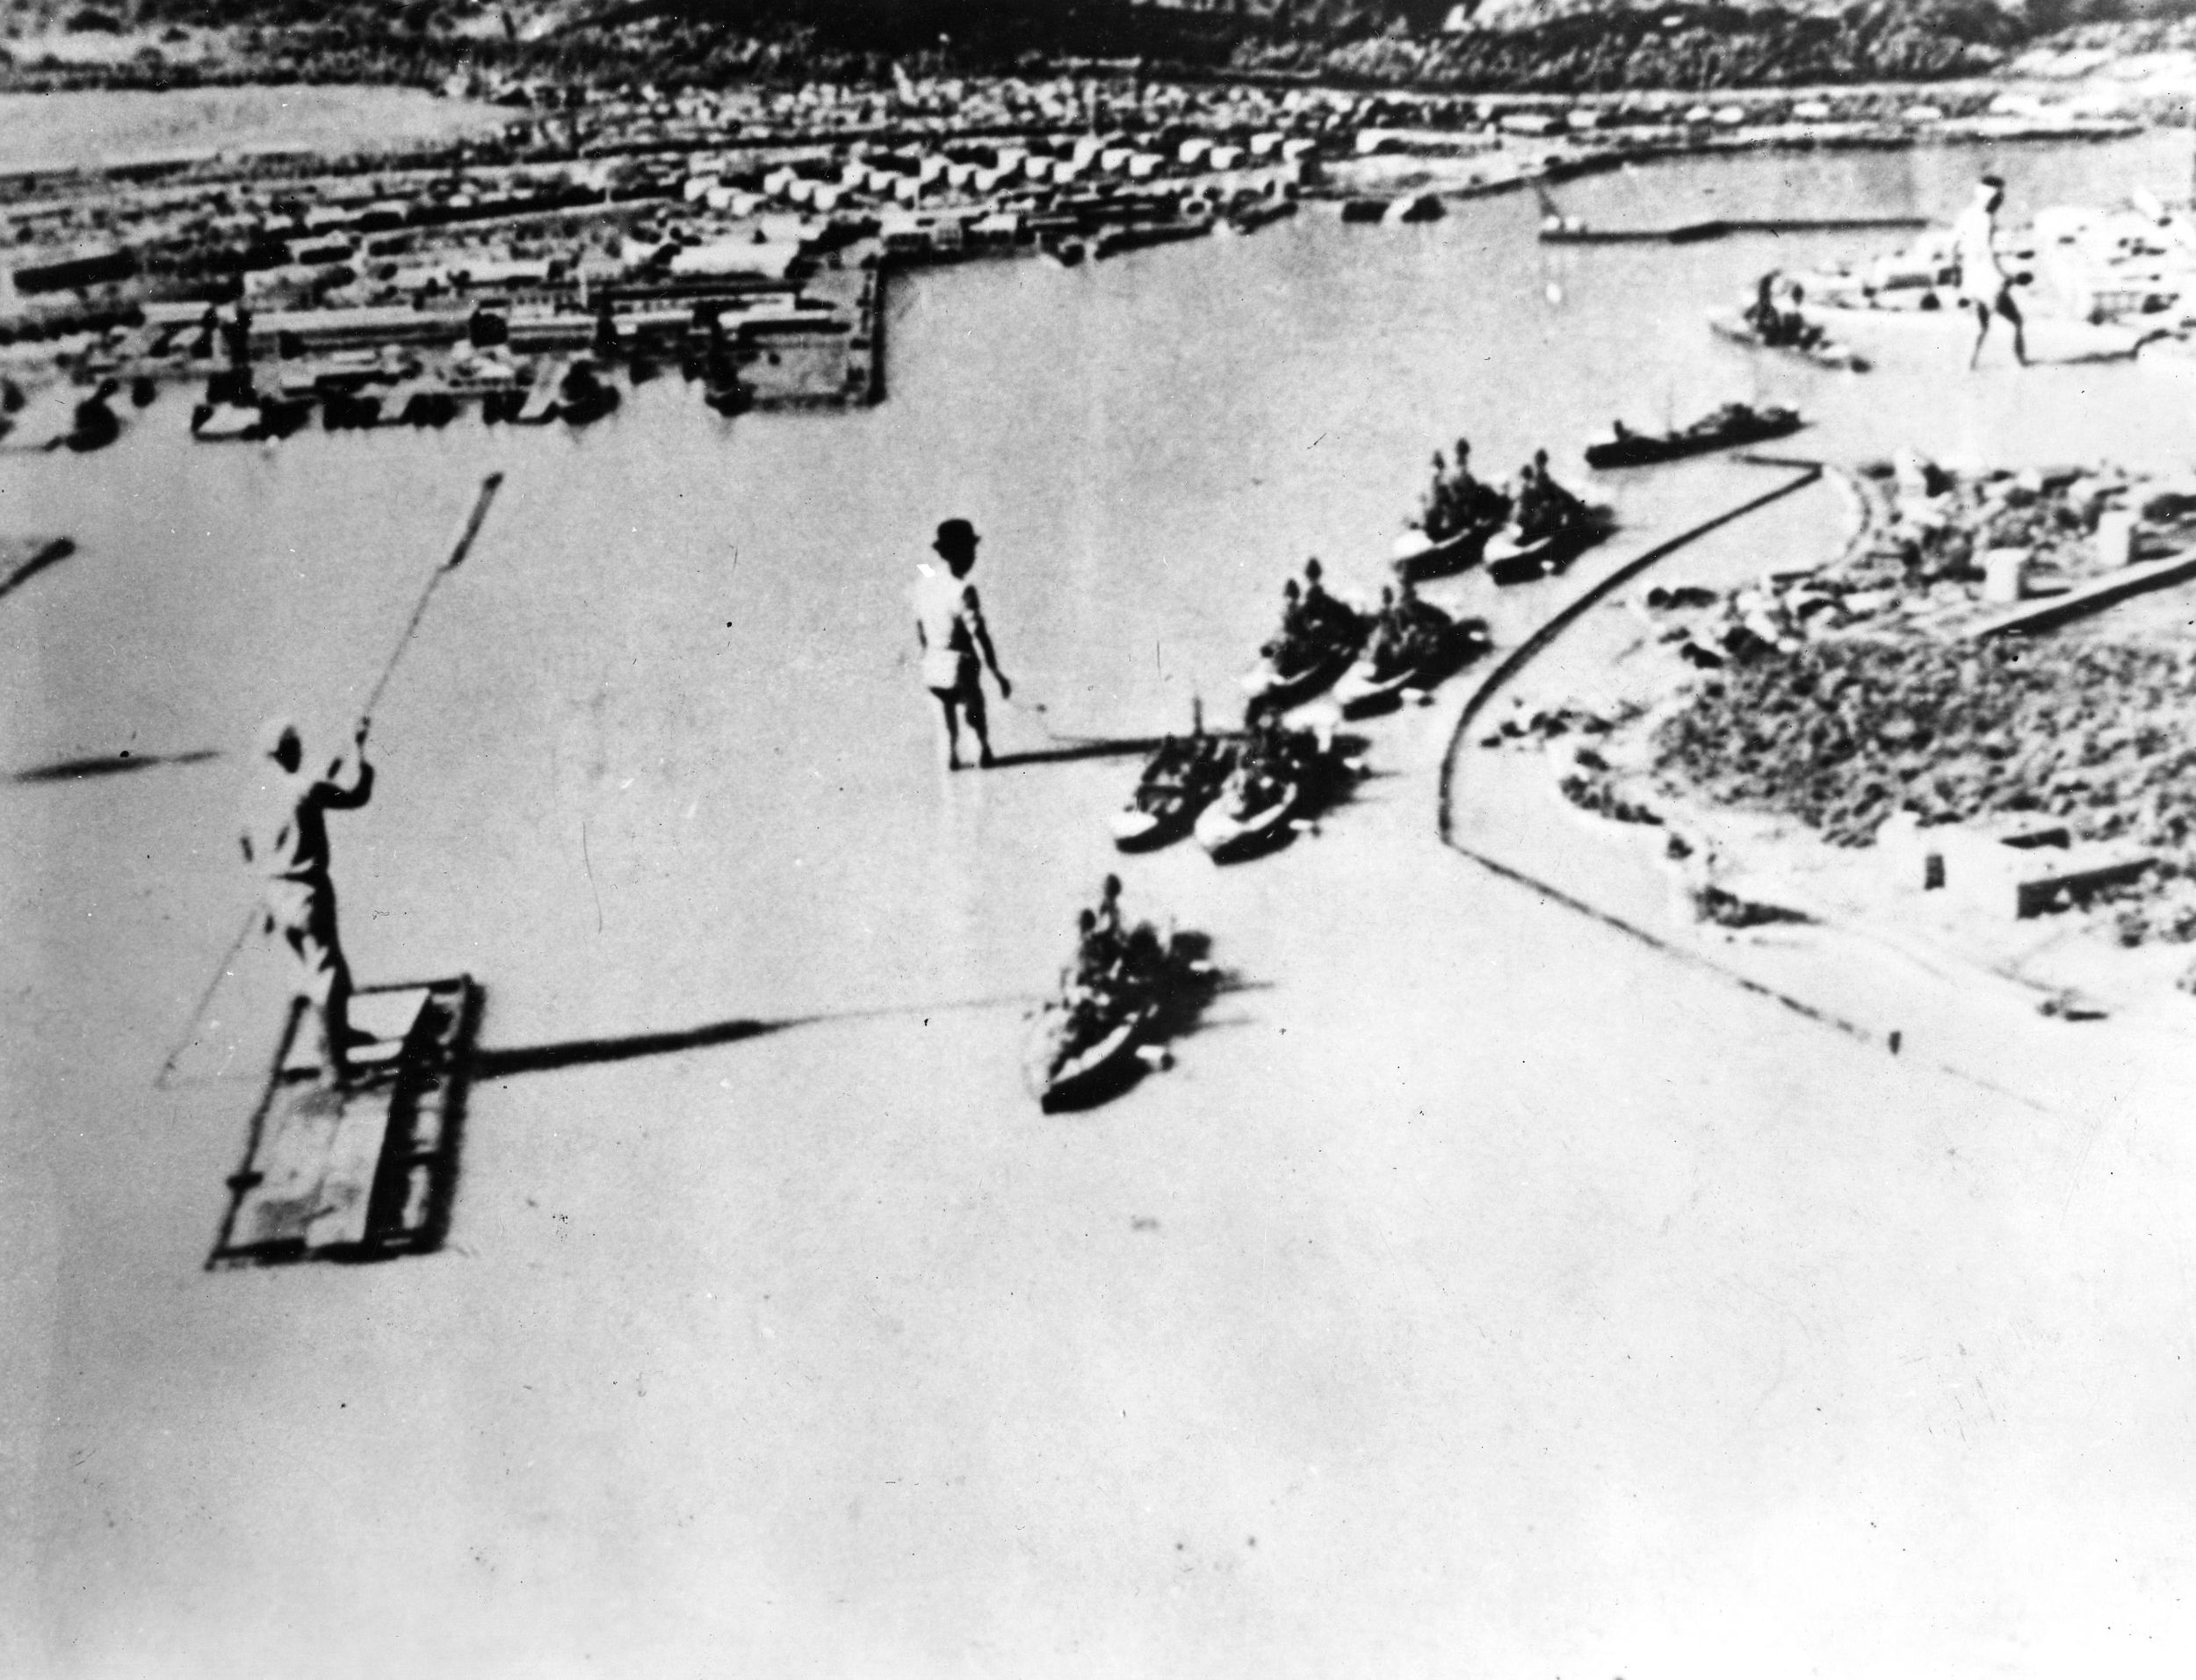 The Japanese created this mock-up of Ford Island and Battleship Row after the attack for use in a propaganda film.